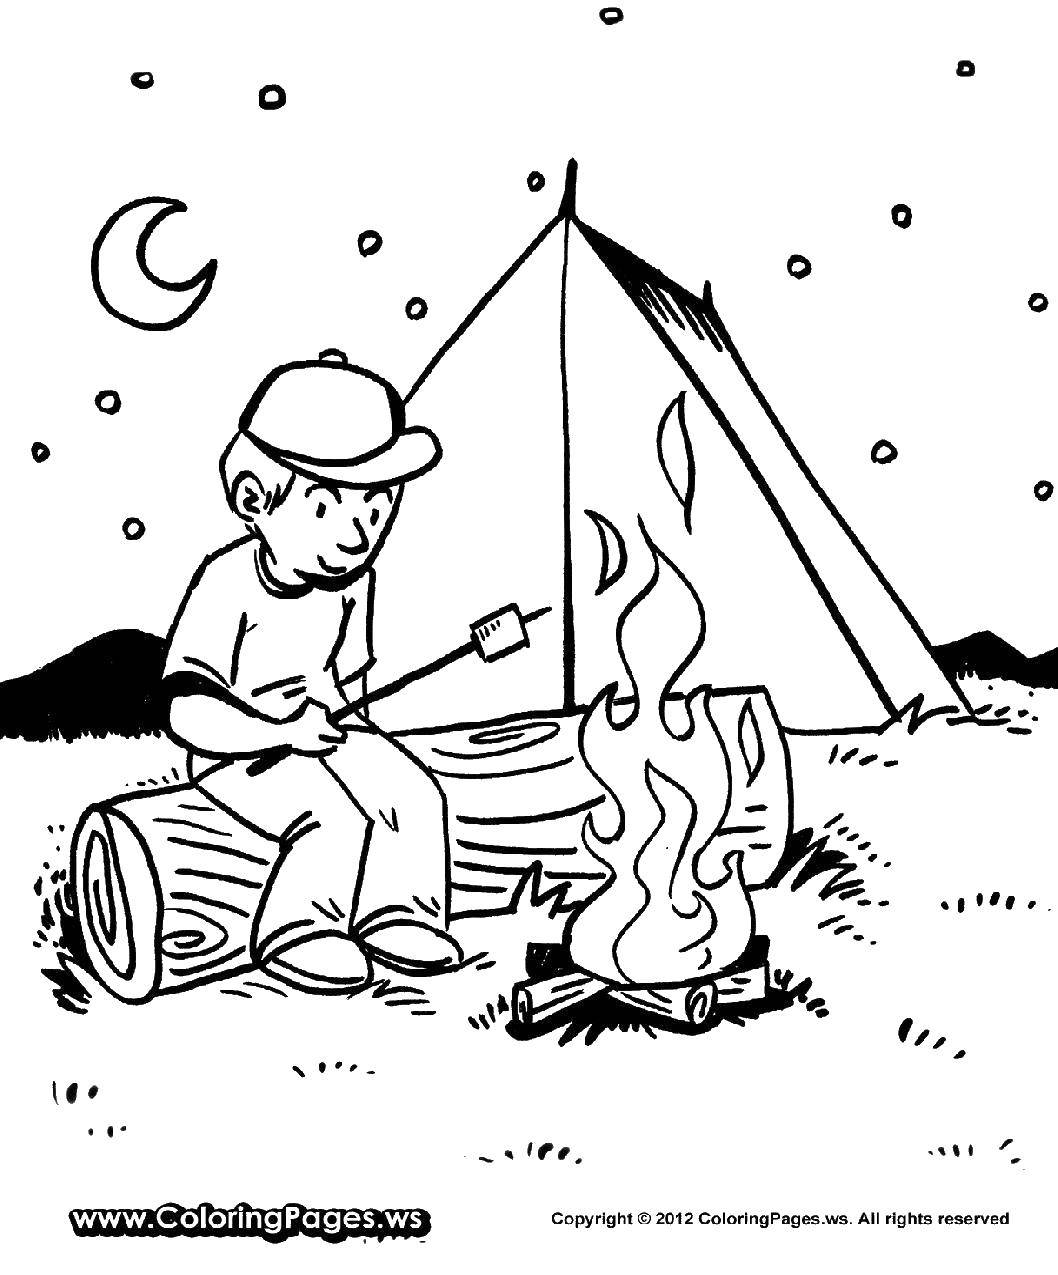 Coloring Boy roasts marshmallows. Category Camping. Tags:  leisure, nature, marshmallow, boys.